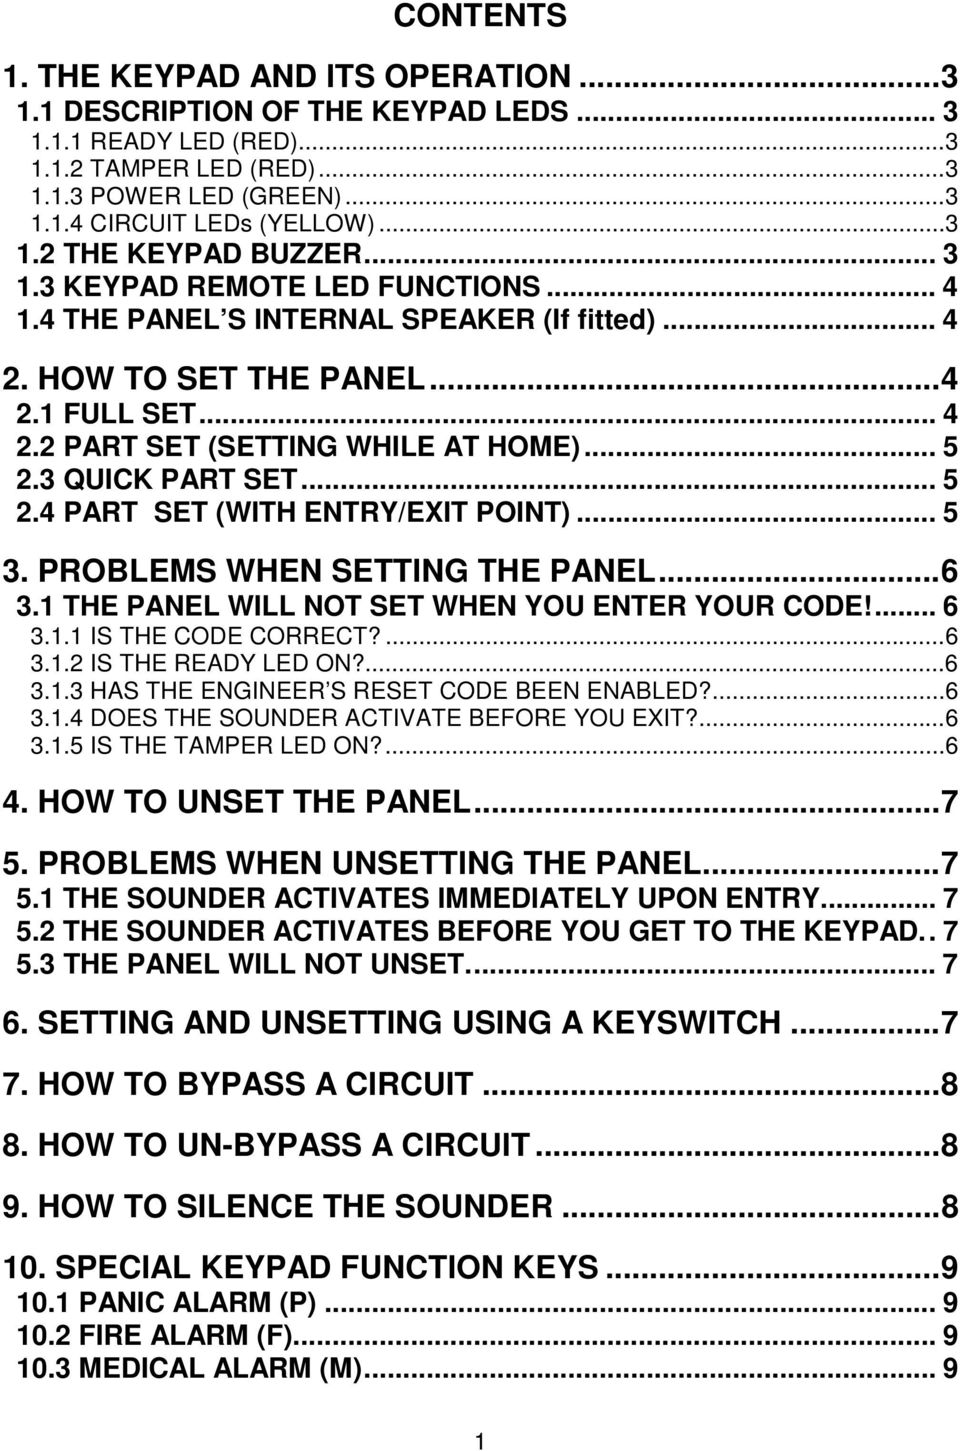 .. 5 2.4 PART SET (WITH ENTRY/EXIT POINT)... 5 3. PROBLEMS WHEN SETTING THE PANEL...6 3.1 THE PANEL WILL NOT SET WHEN YOU ENTER YOUR CODE!... 6 3.1.1 IS THE CODE CORRECT?...6 3.1.2 IS THE READY LED ON?